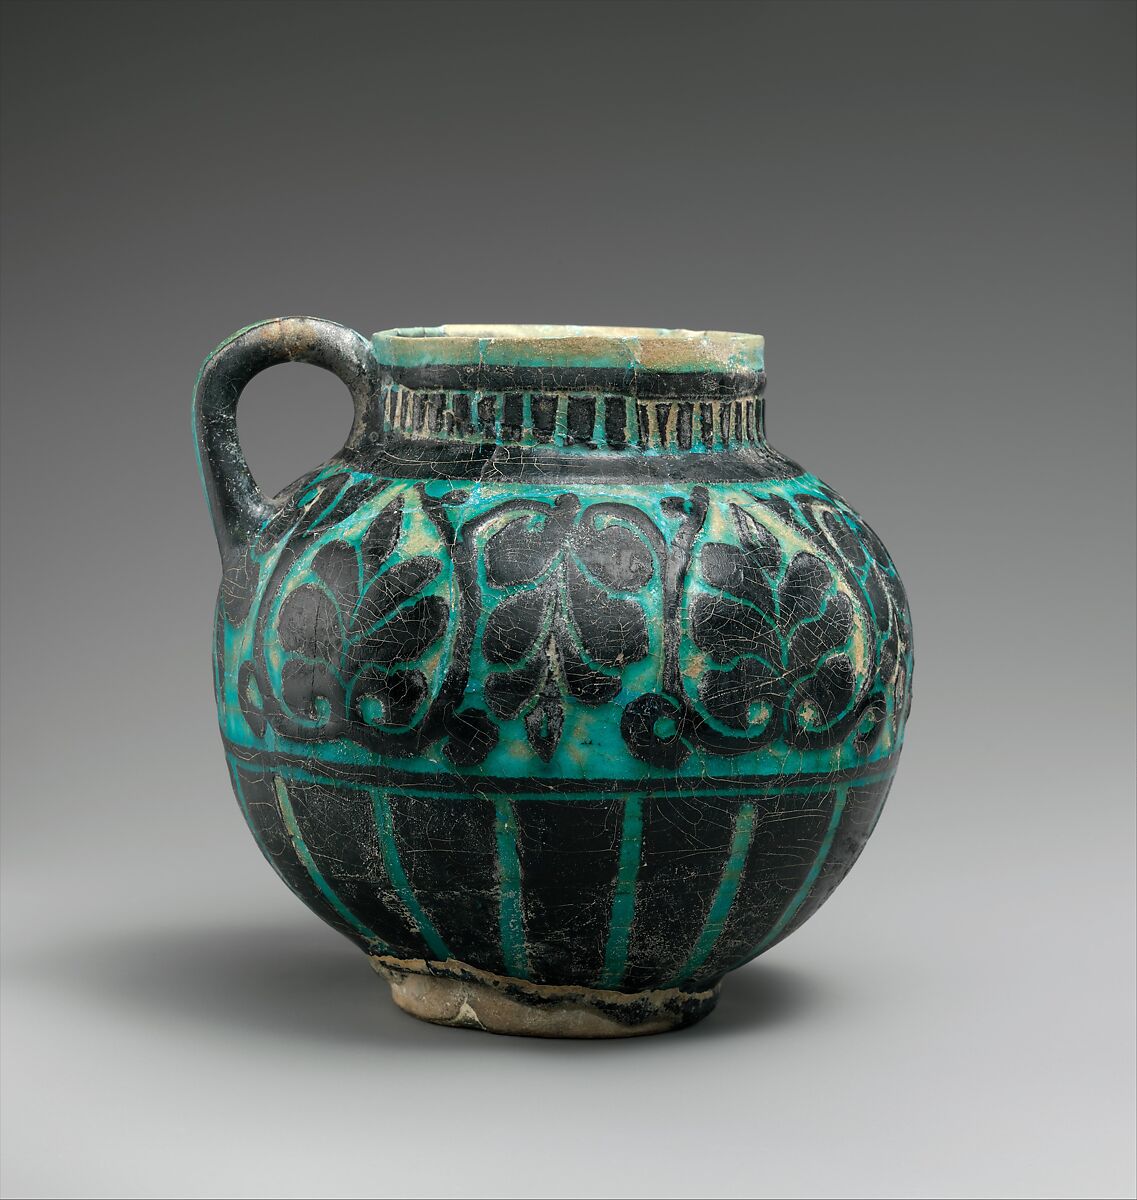 Jug with Floral Decoration